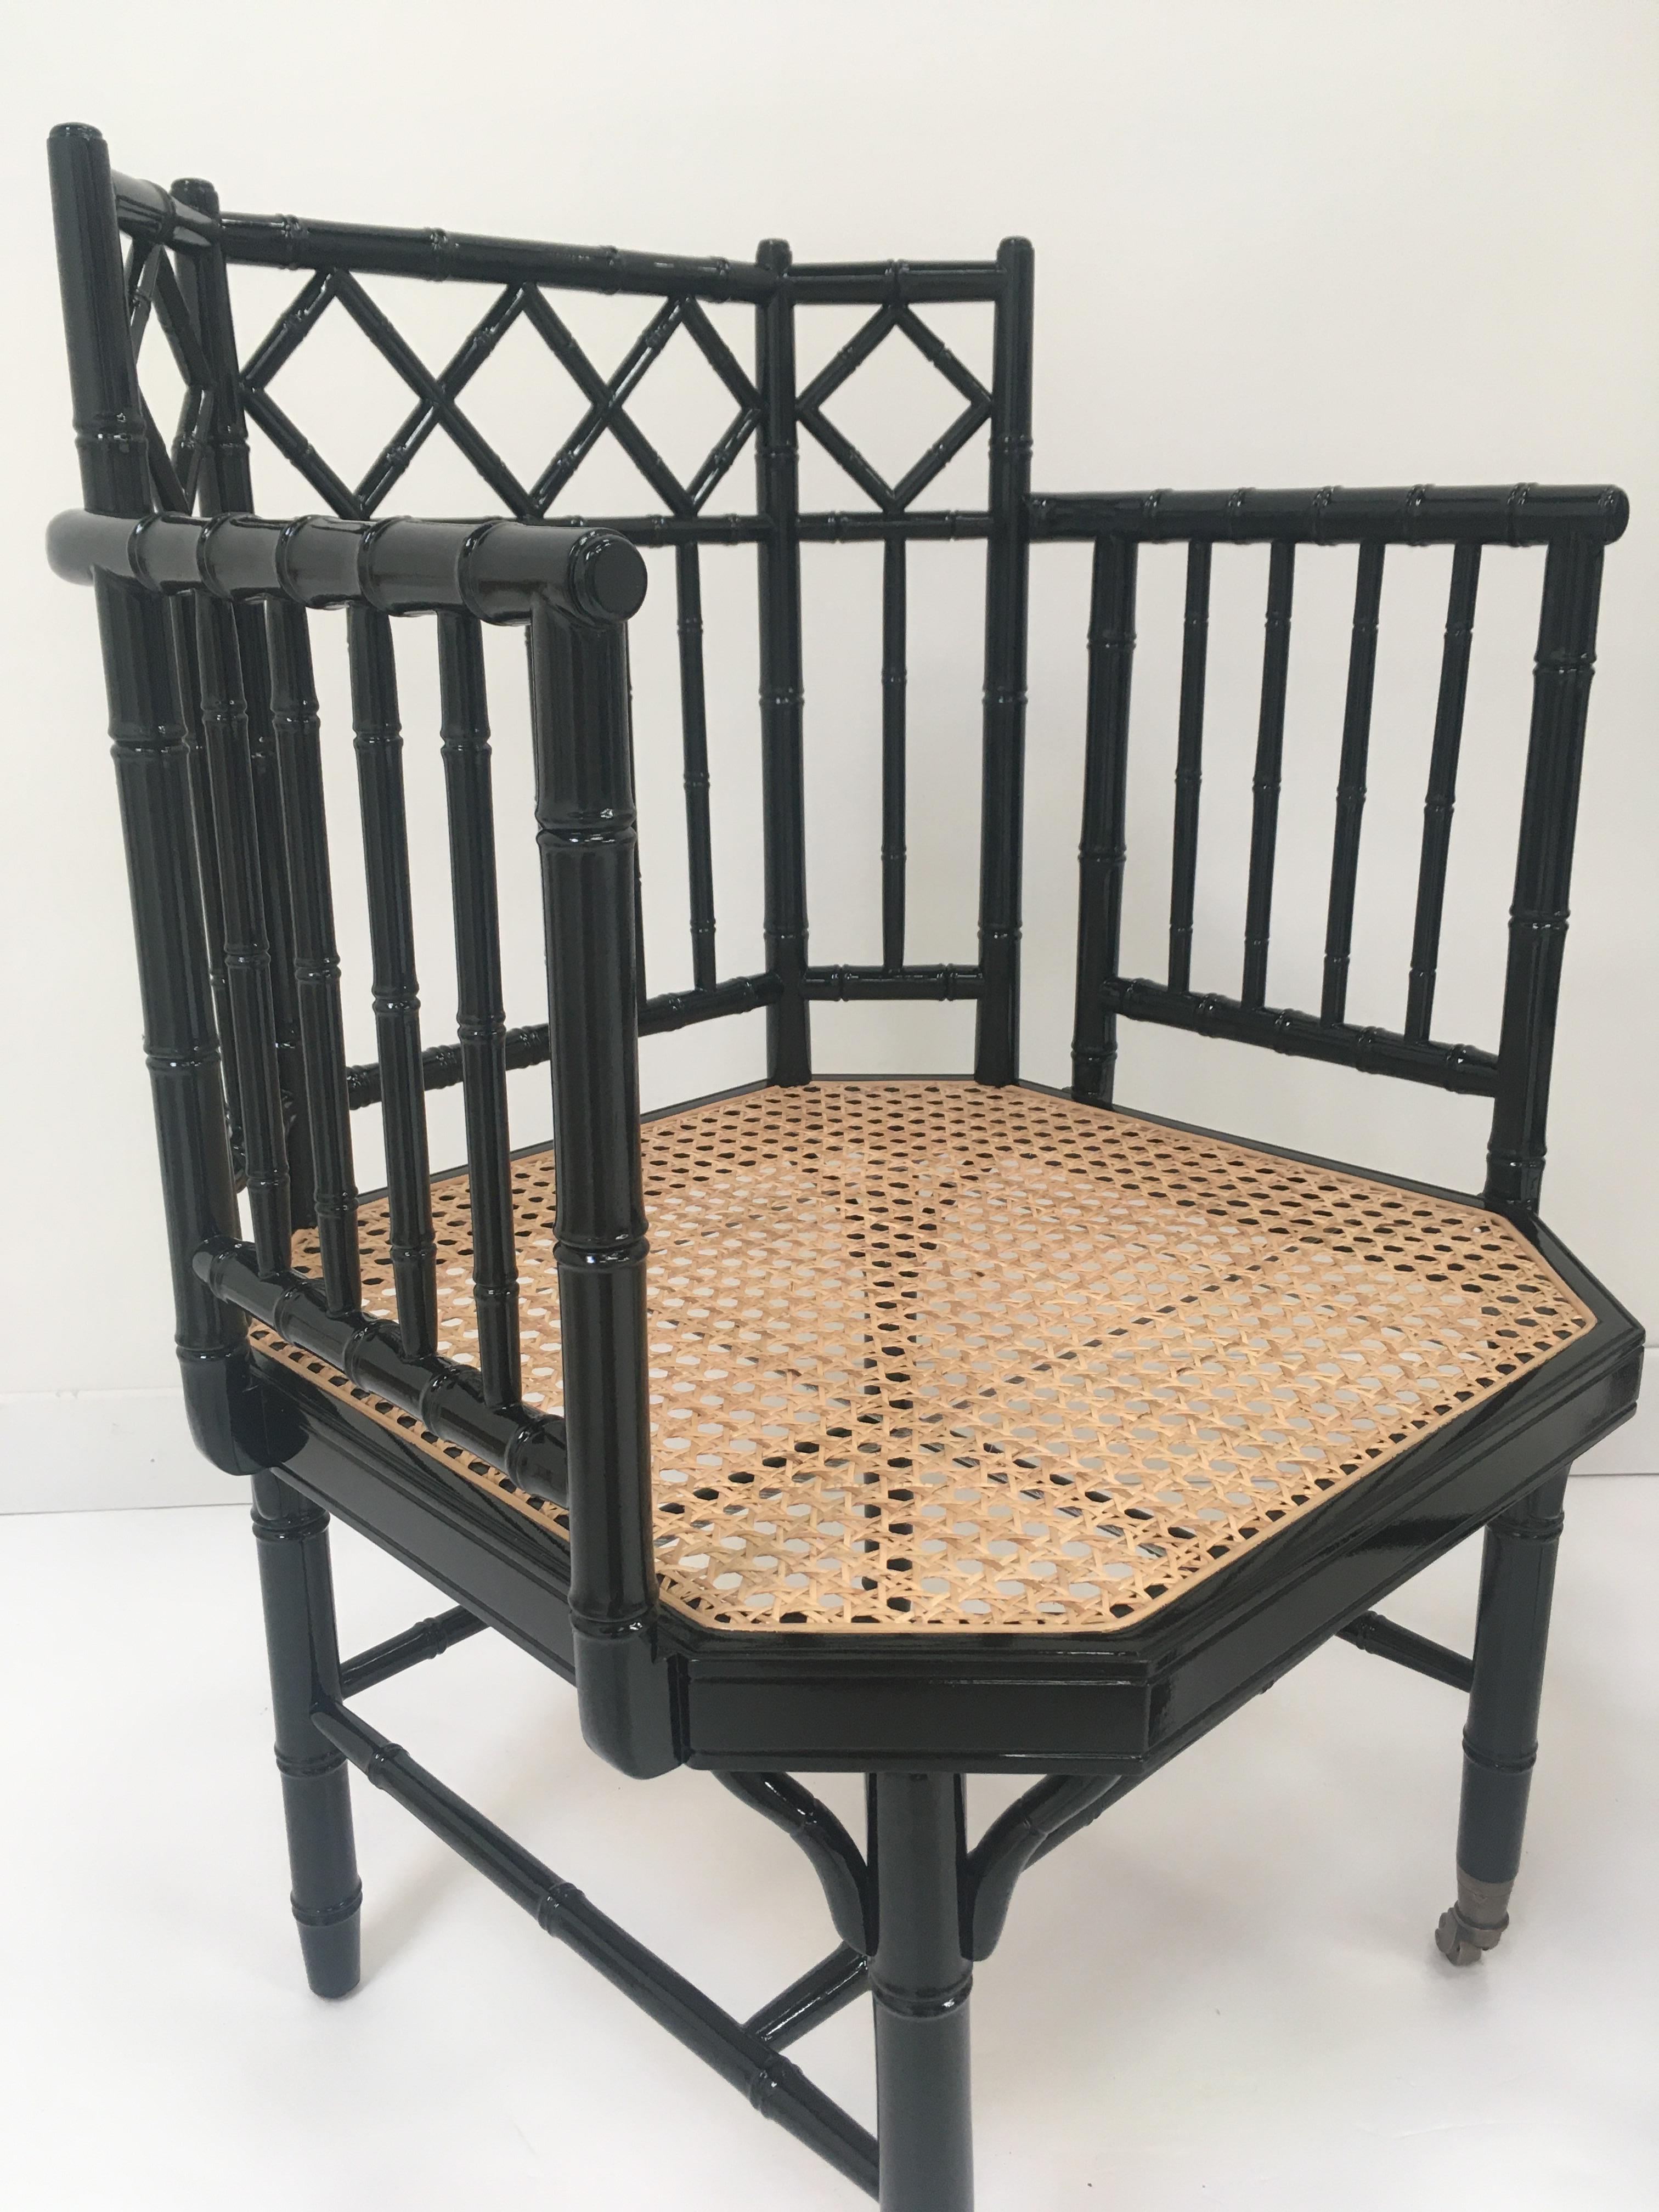 Art Deco design black lacquer wooden structure bamboo effect sculpted brass wheels finish adorned with woven cane seat and green fabric.